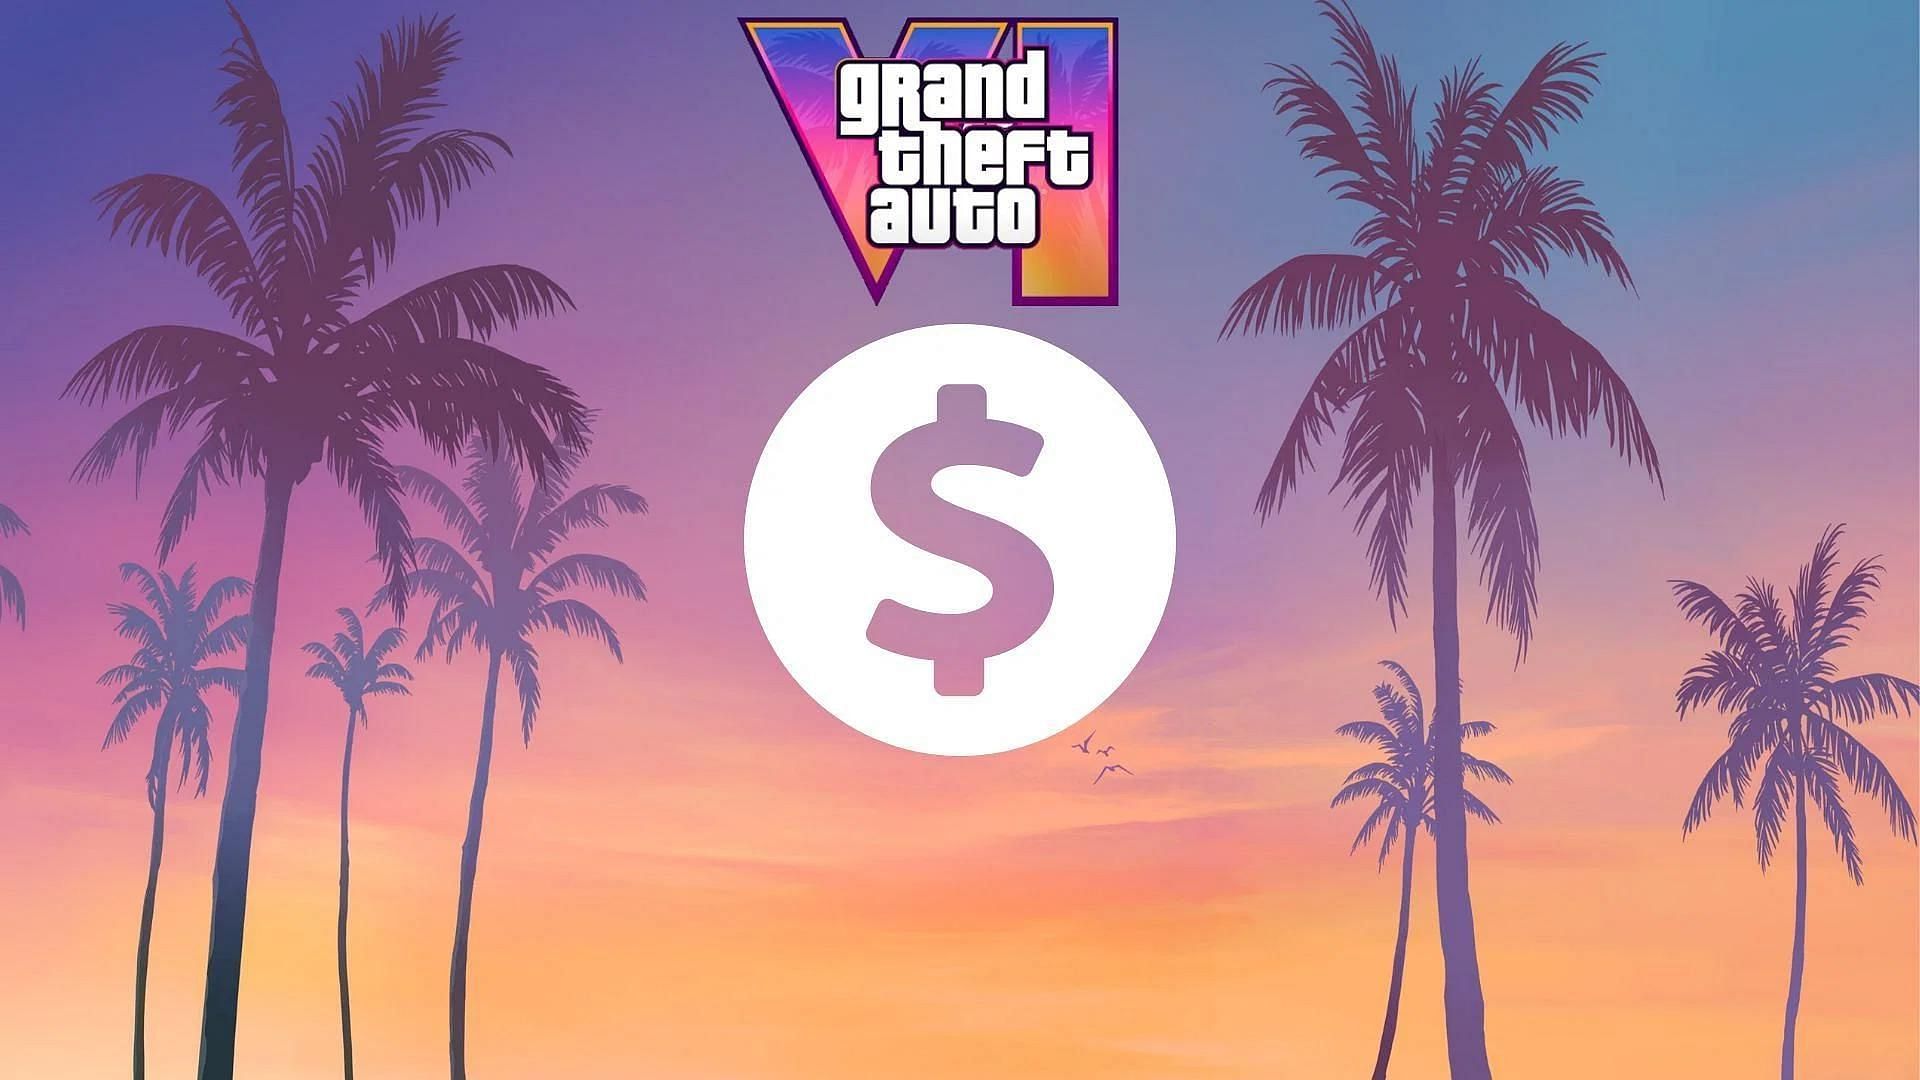 GTA 6 will break revenue records, expected to earn $1,000,000,000 in just 24 hours